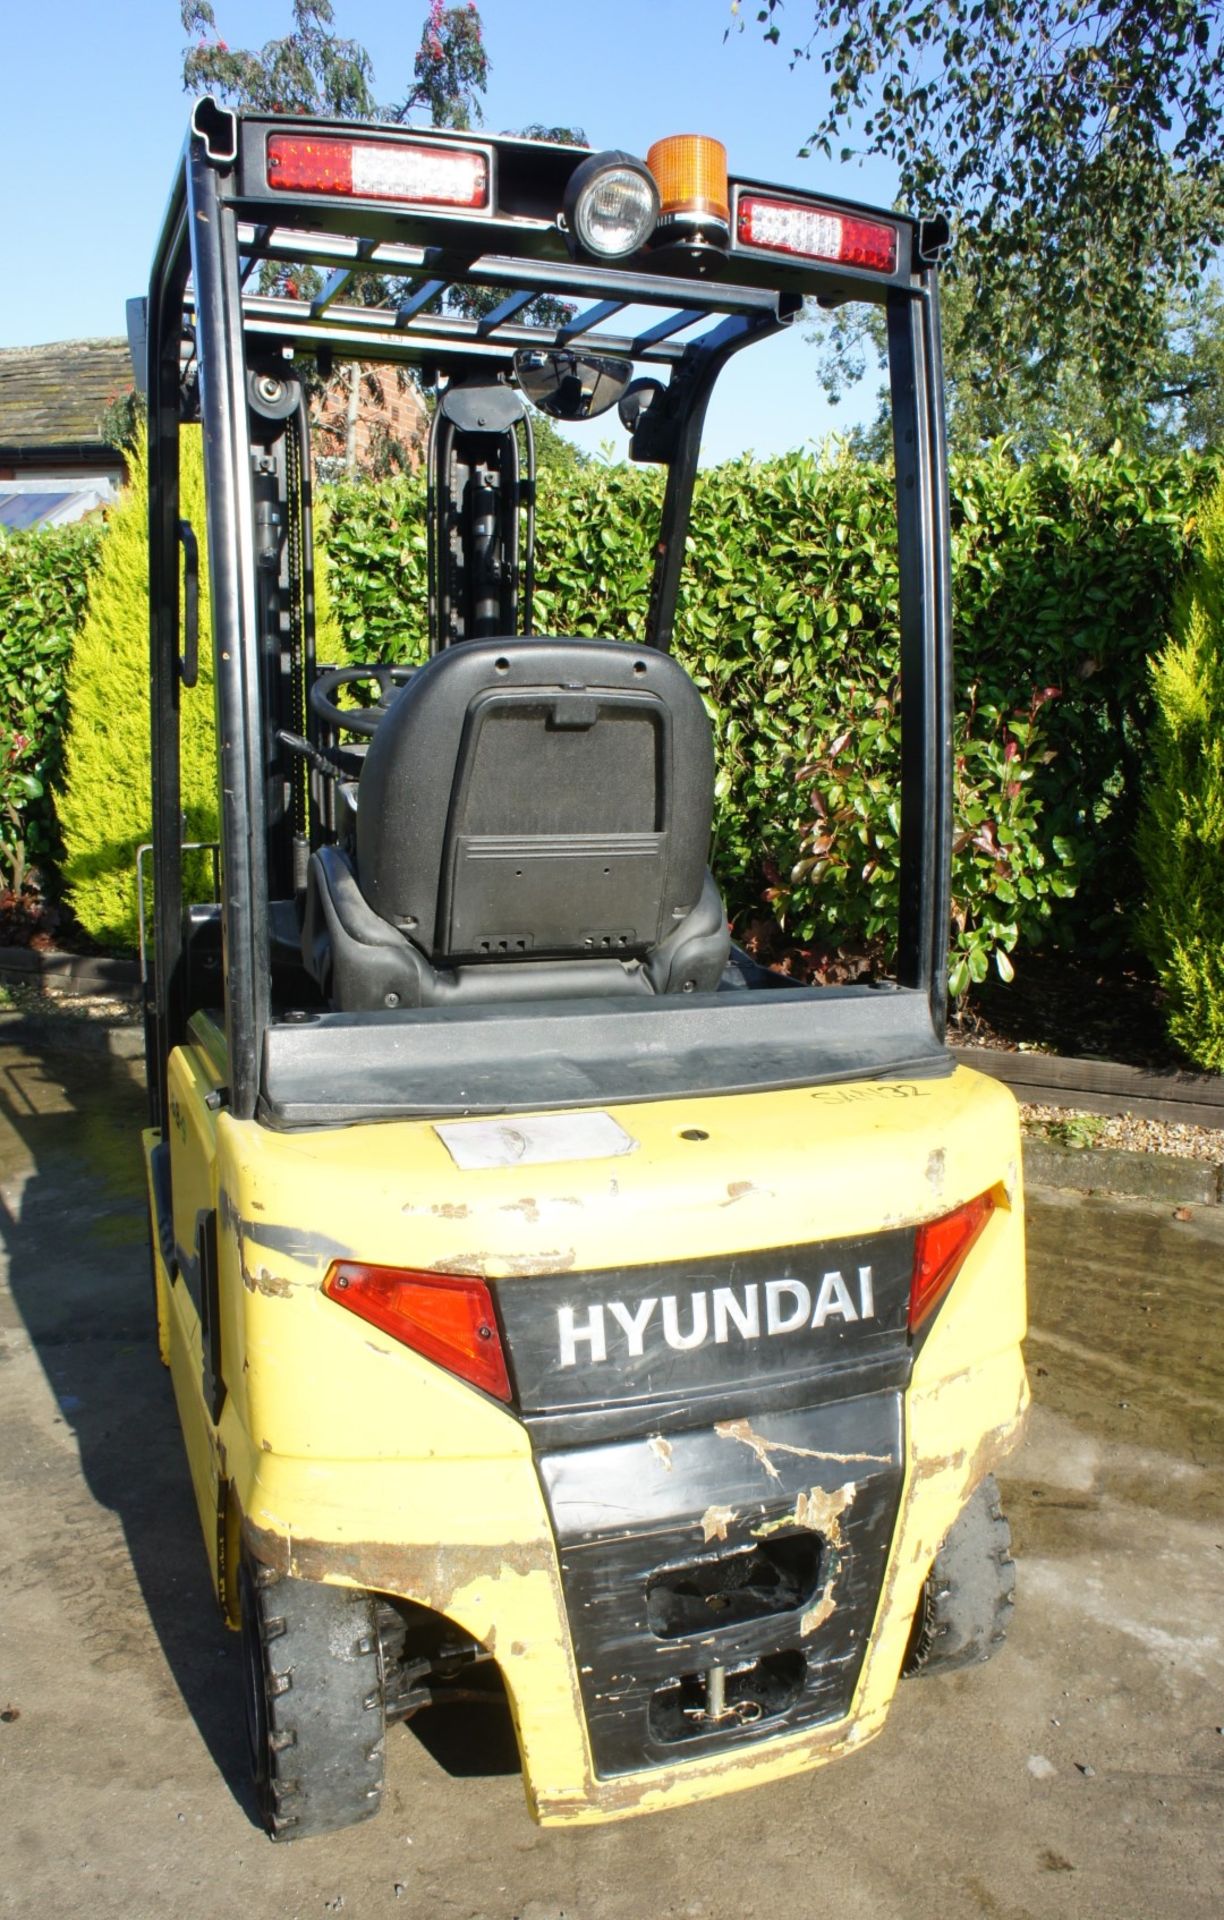 2016 Hyundai 16B-9 Electric Forklift, 1370kg rated capacity, container spec triple mast, 4750mm lift - Image 7 of 17